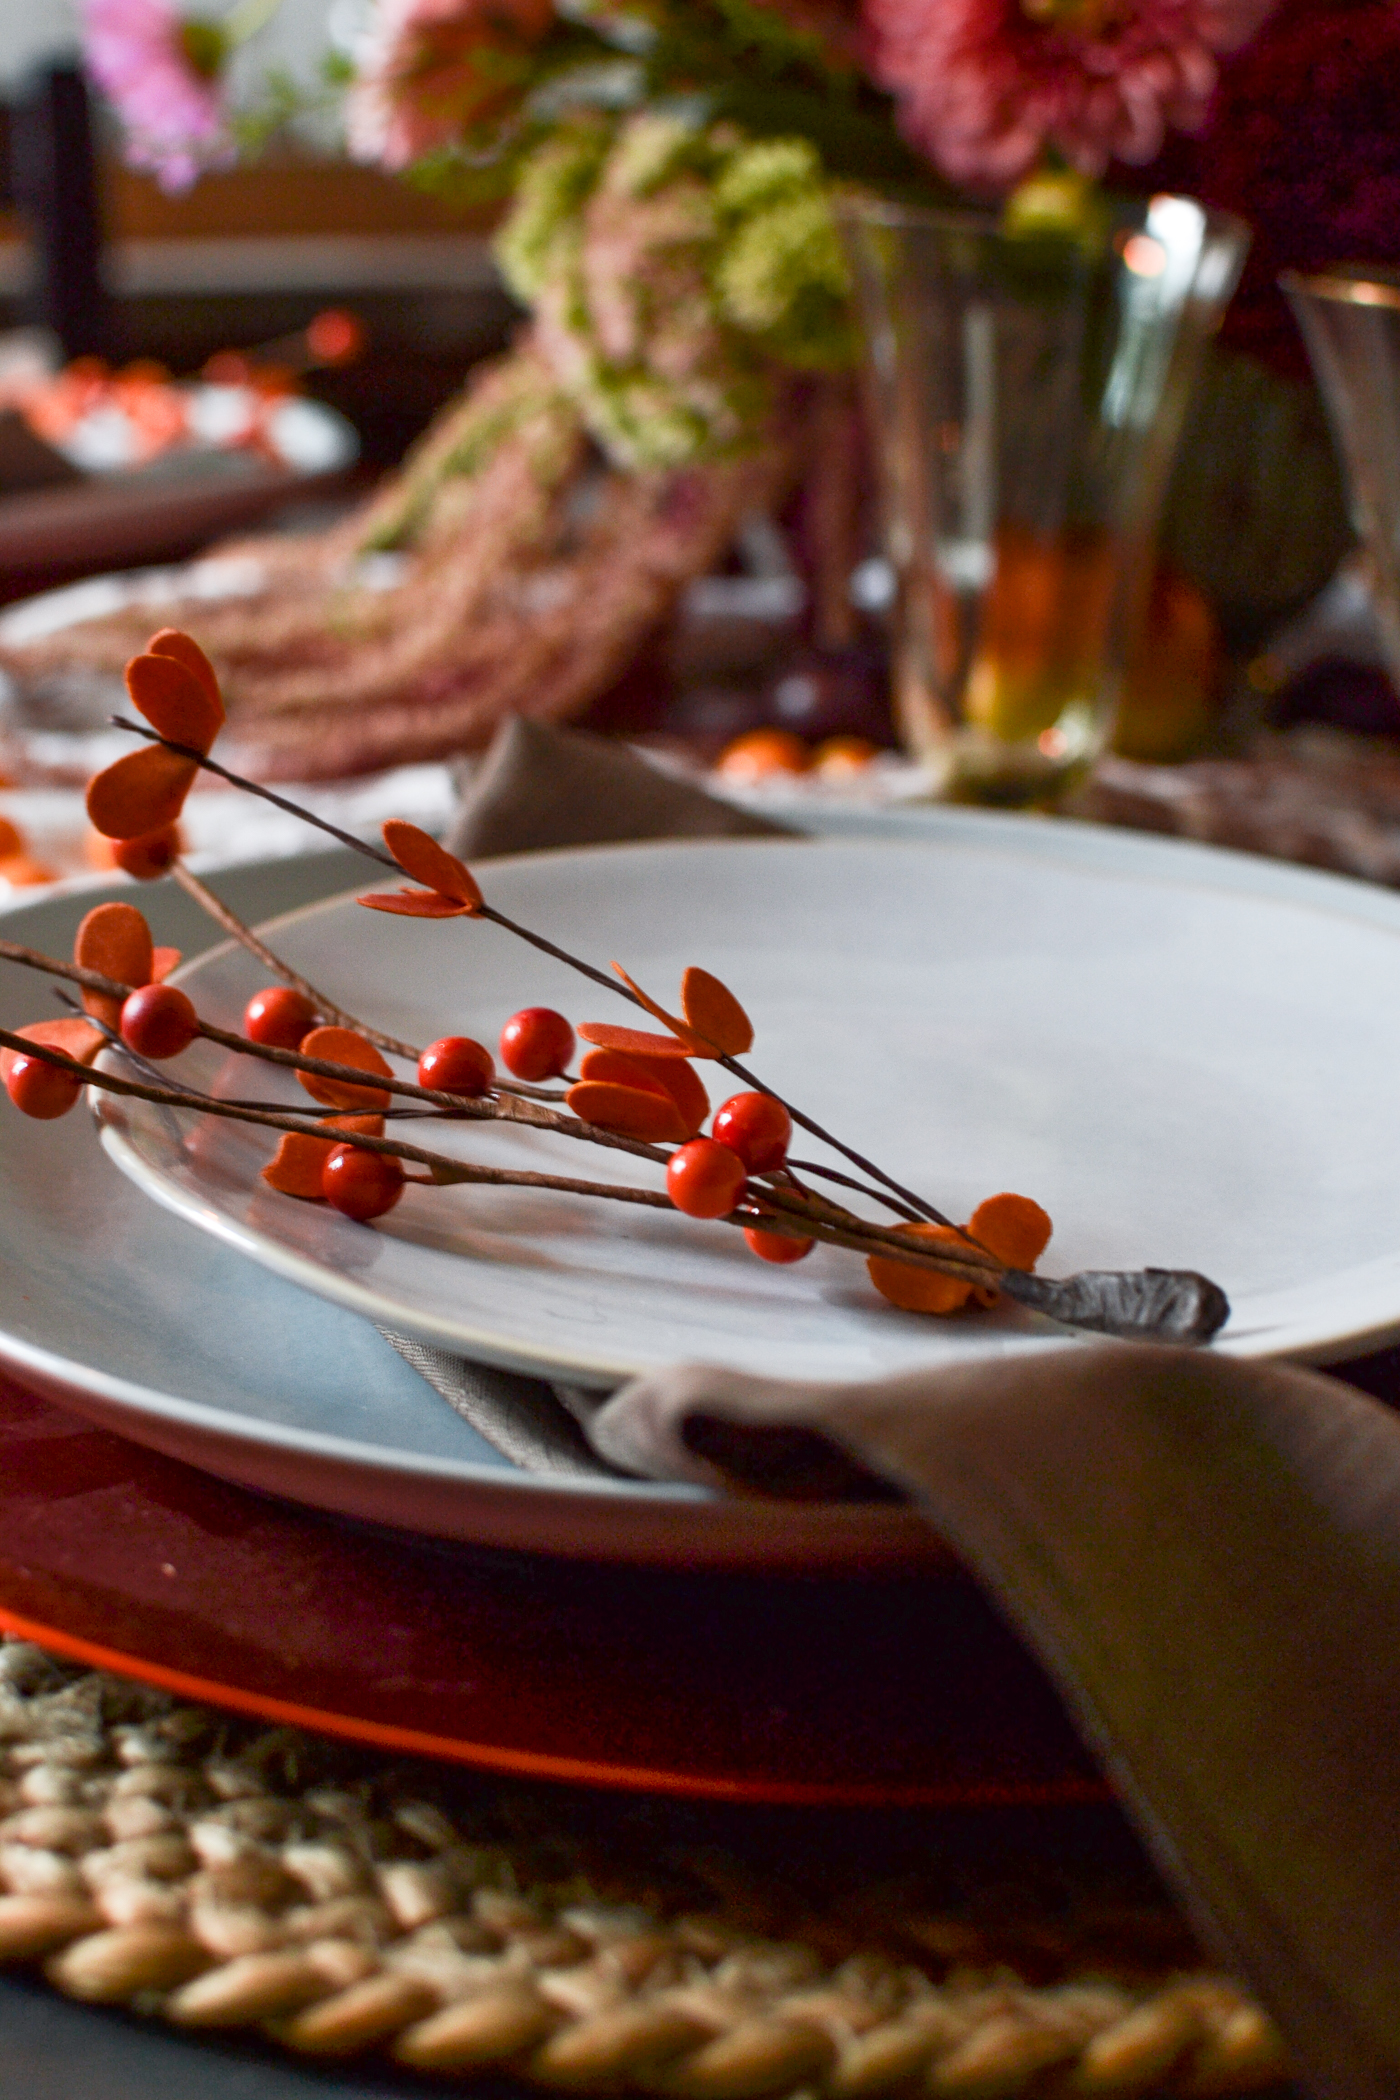 A spring of orange berries on top of a soft grey dinner plate.